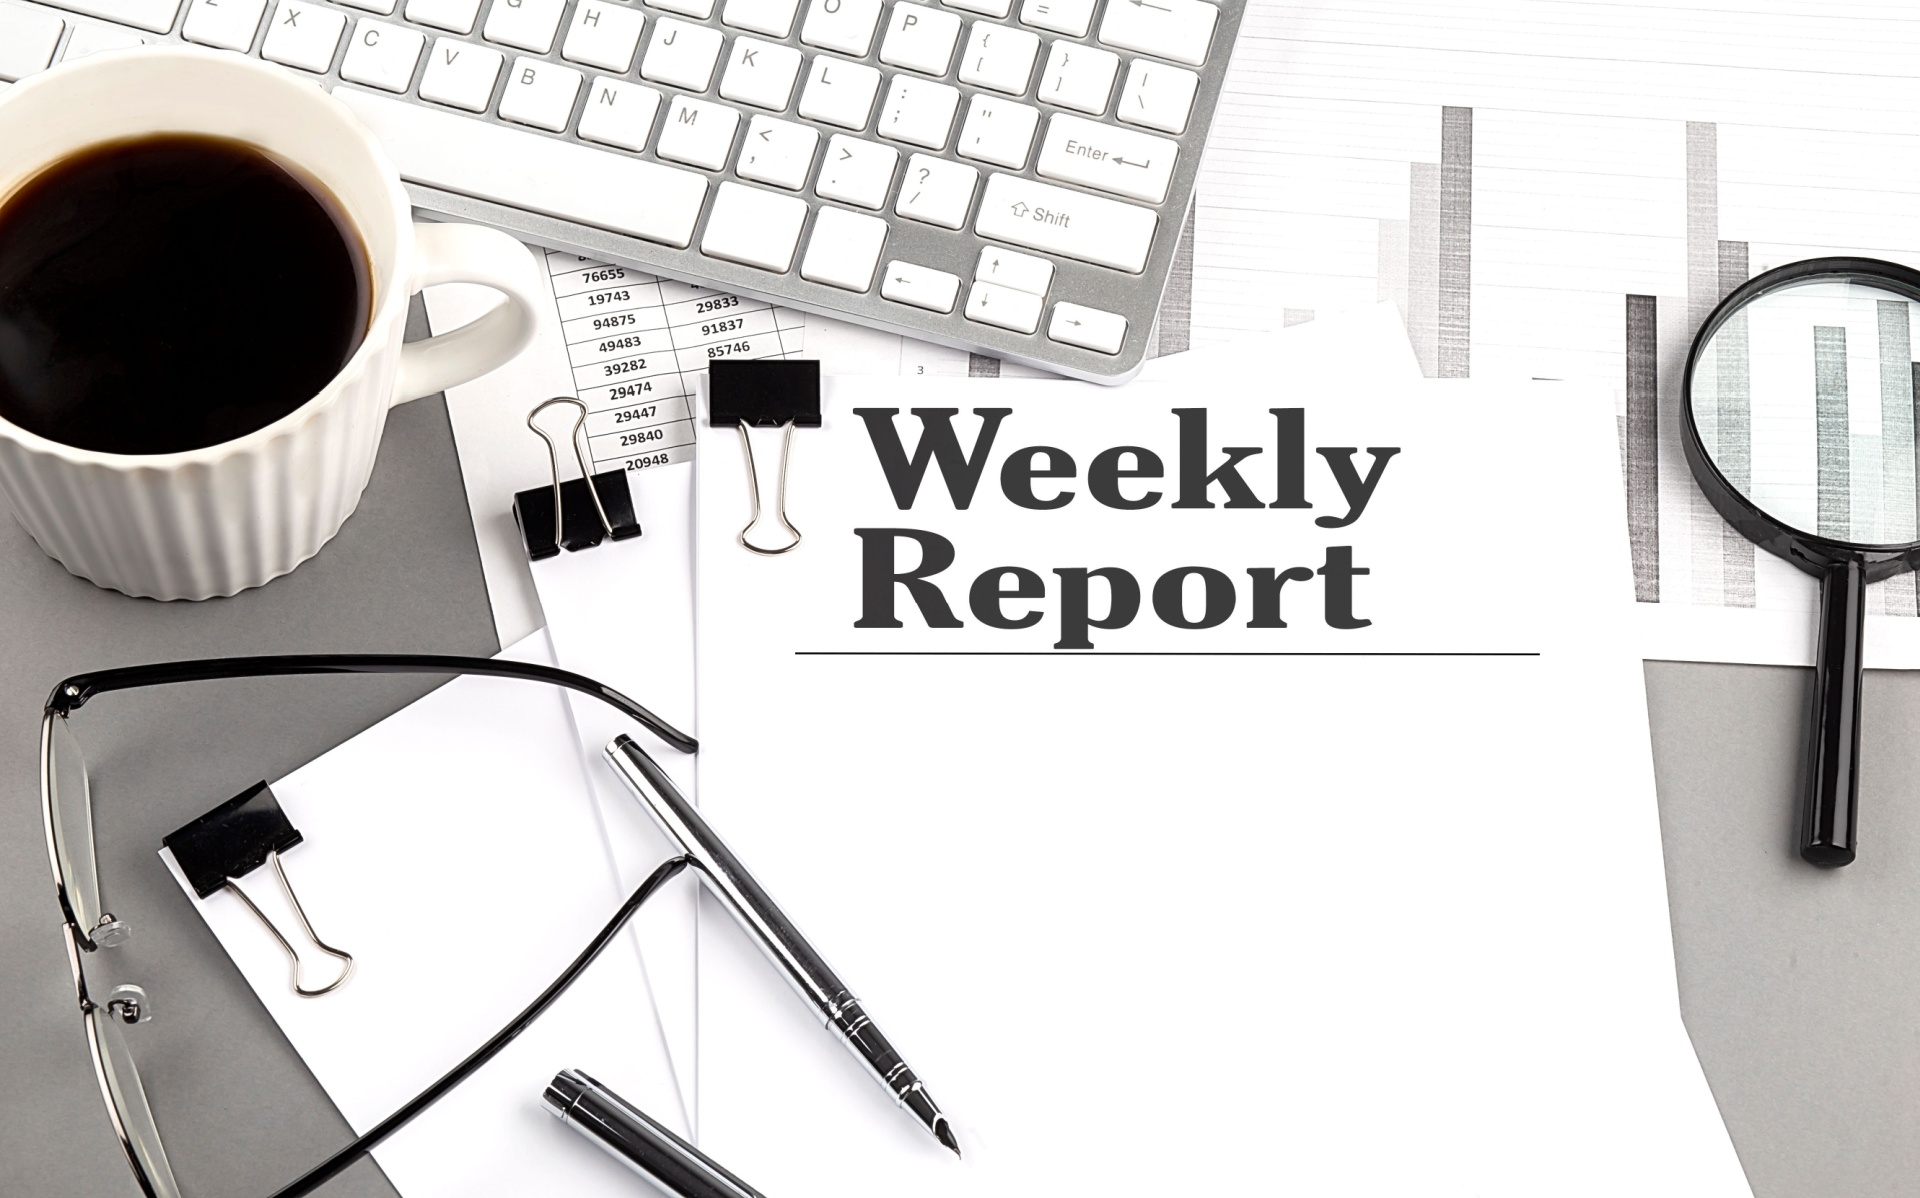 Weekly report on a clutered desk with coffee and a keyboard on there. 